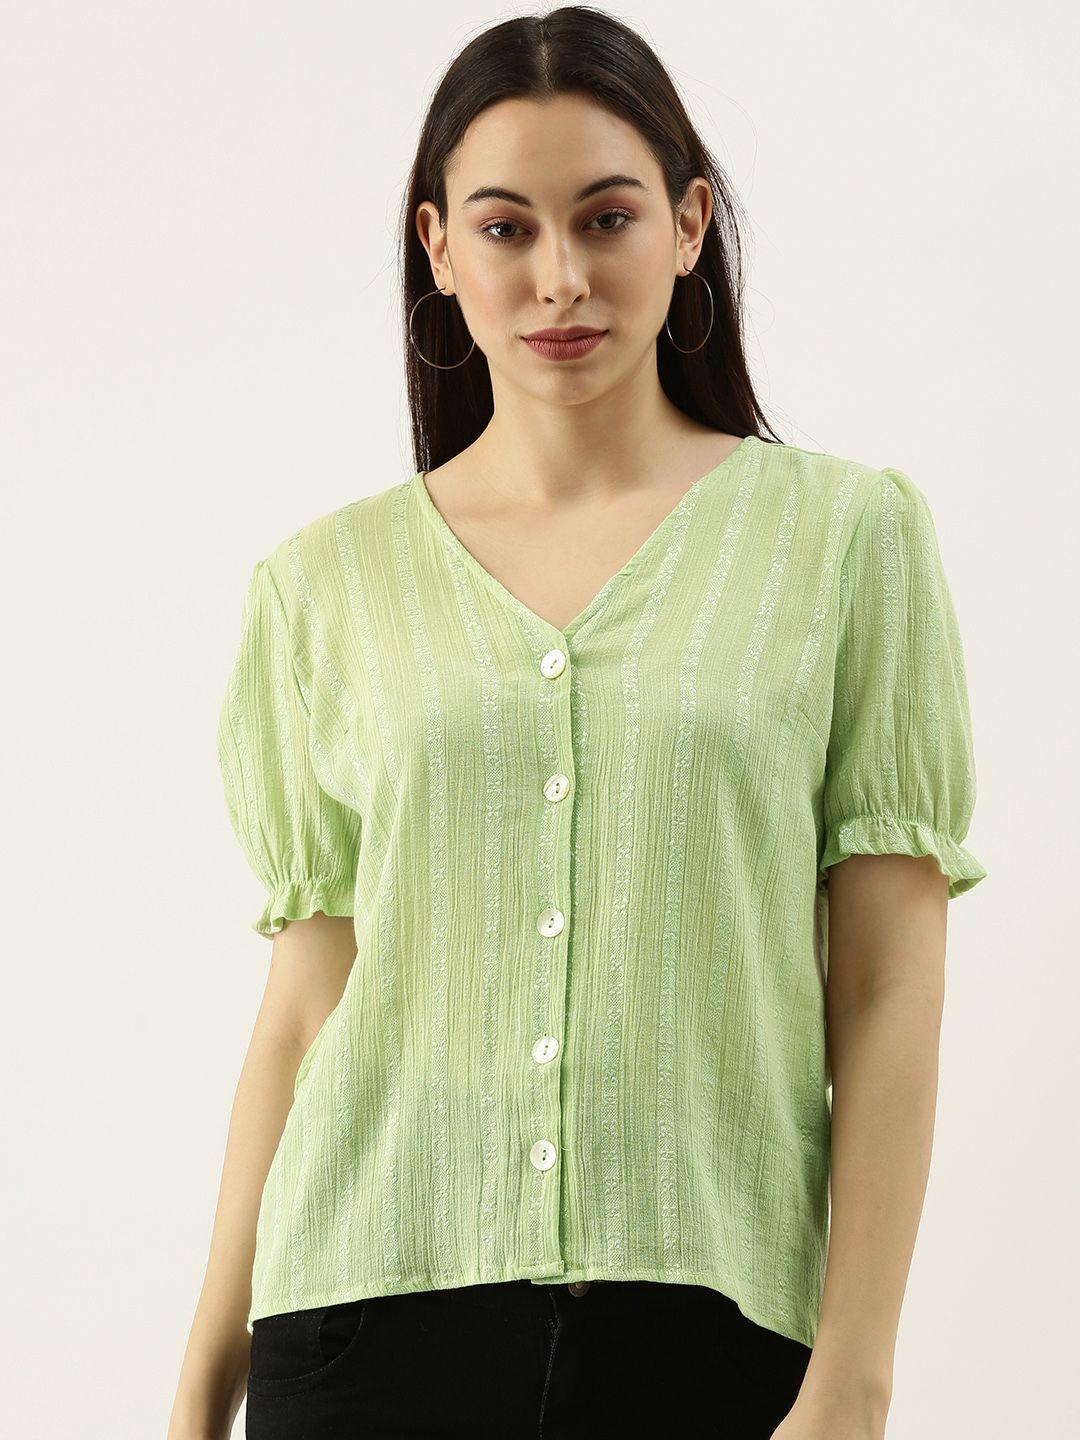 and green self-striped top